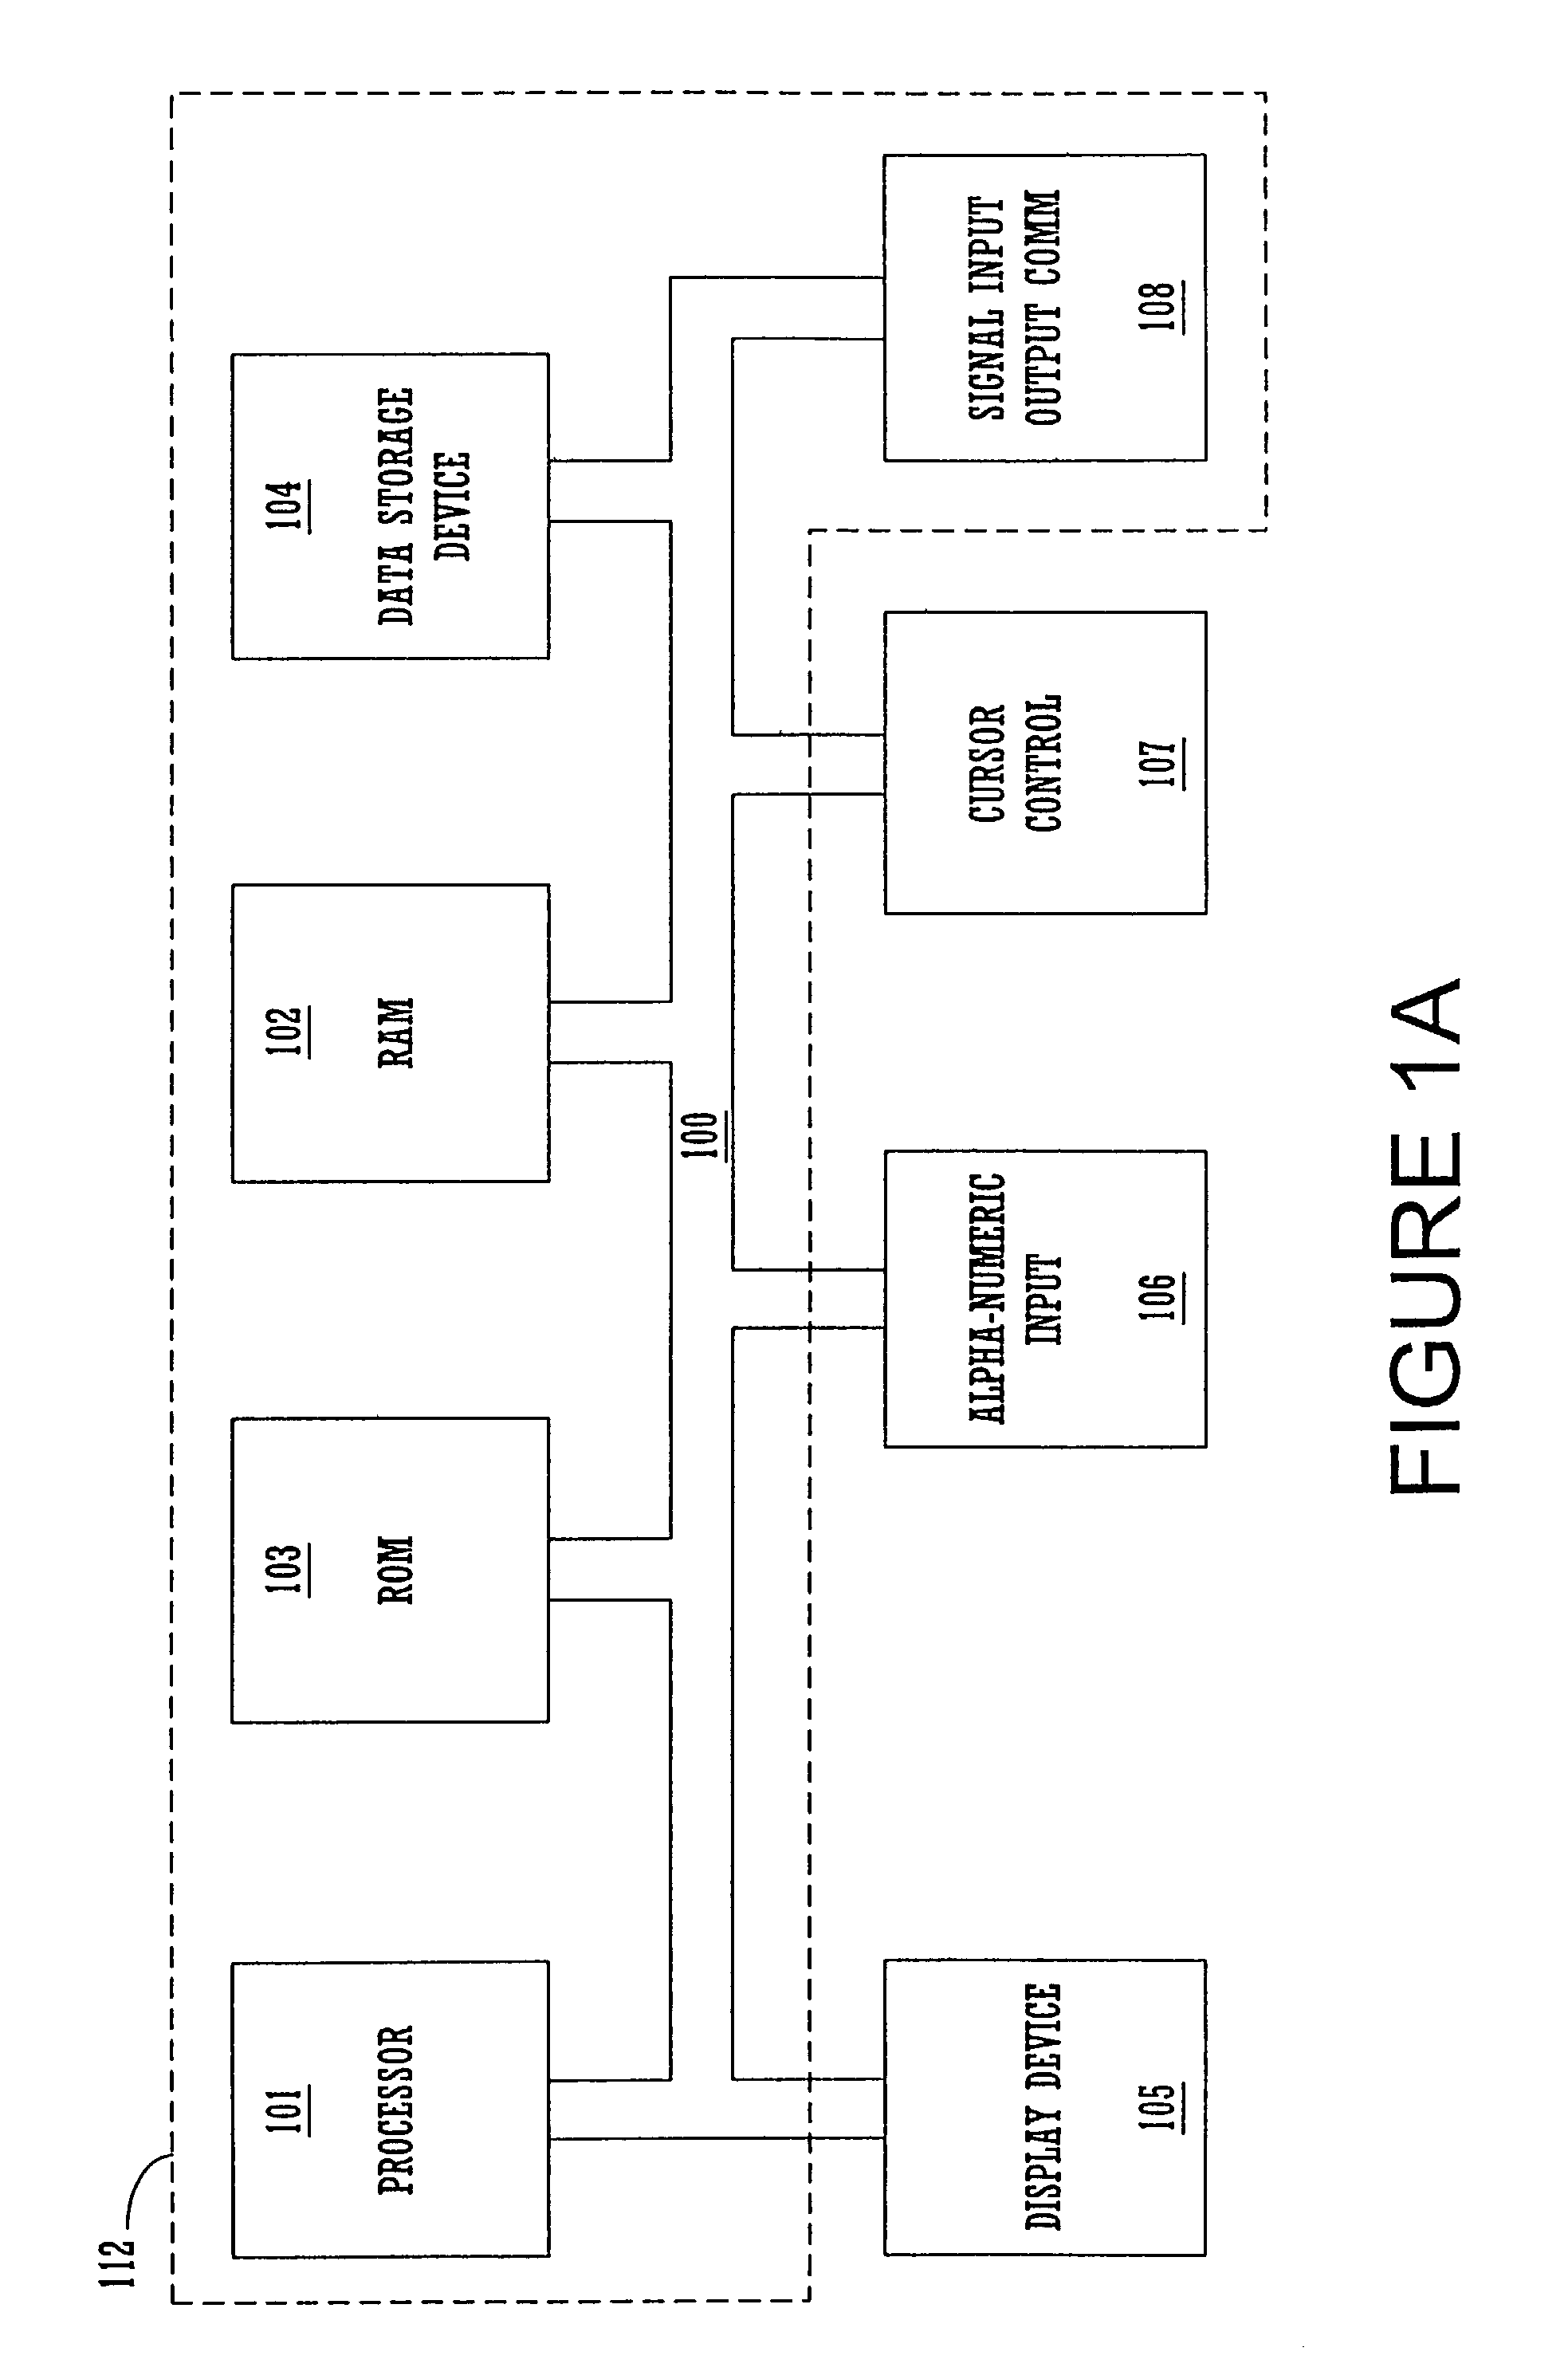 System and method for data transformation of device databases for forward compatibility